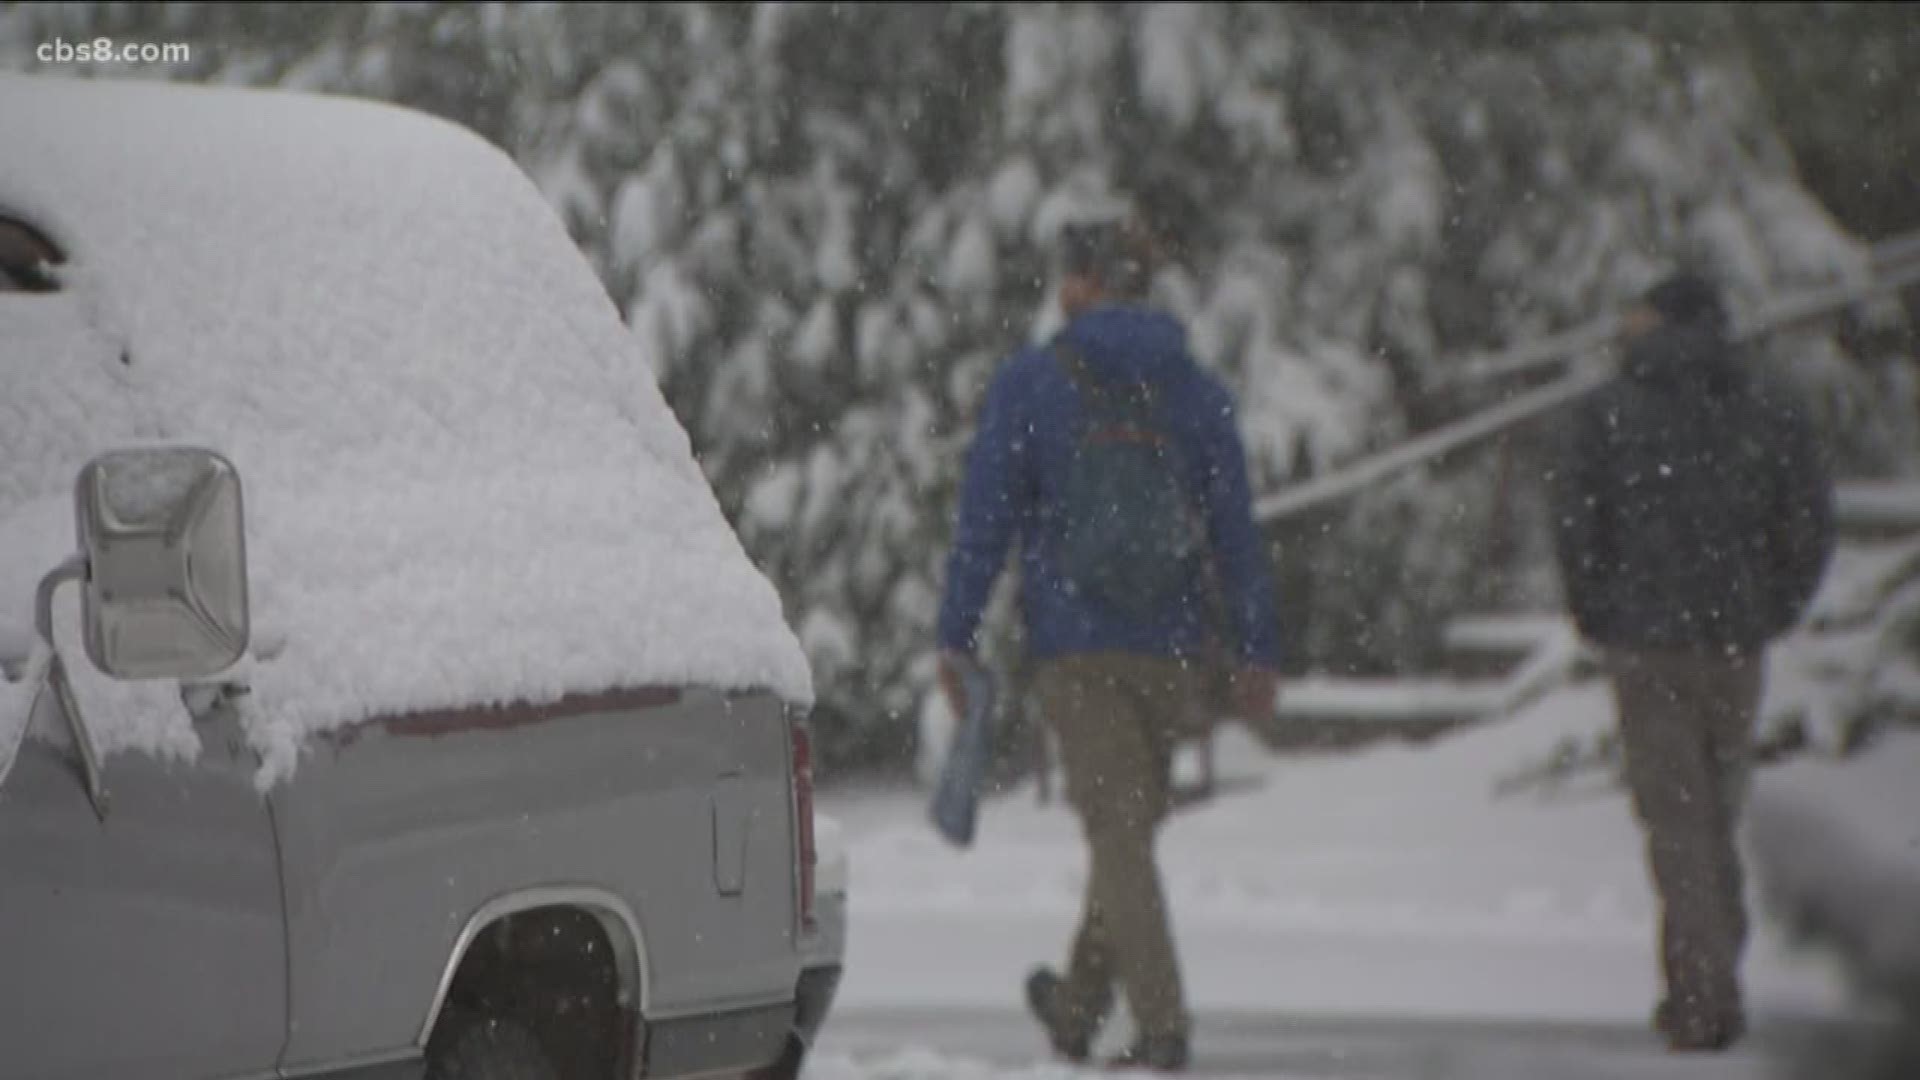 There's no shortage of snow in Mount Laguna.